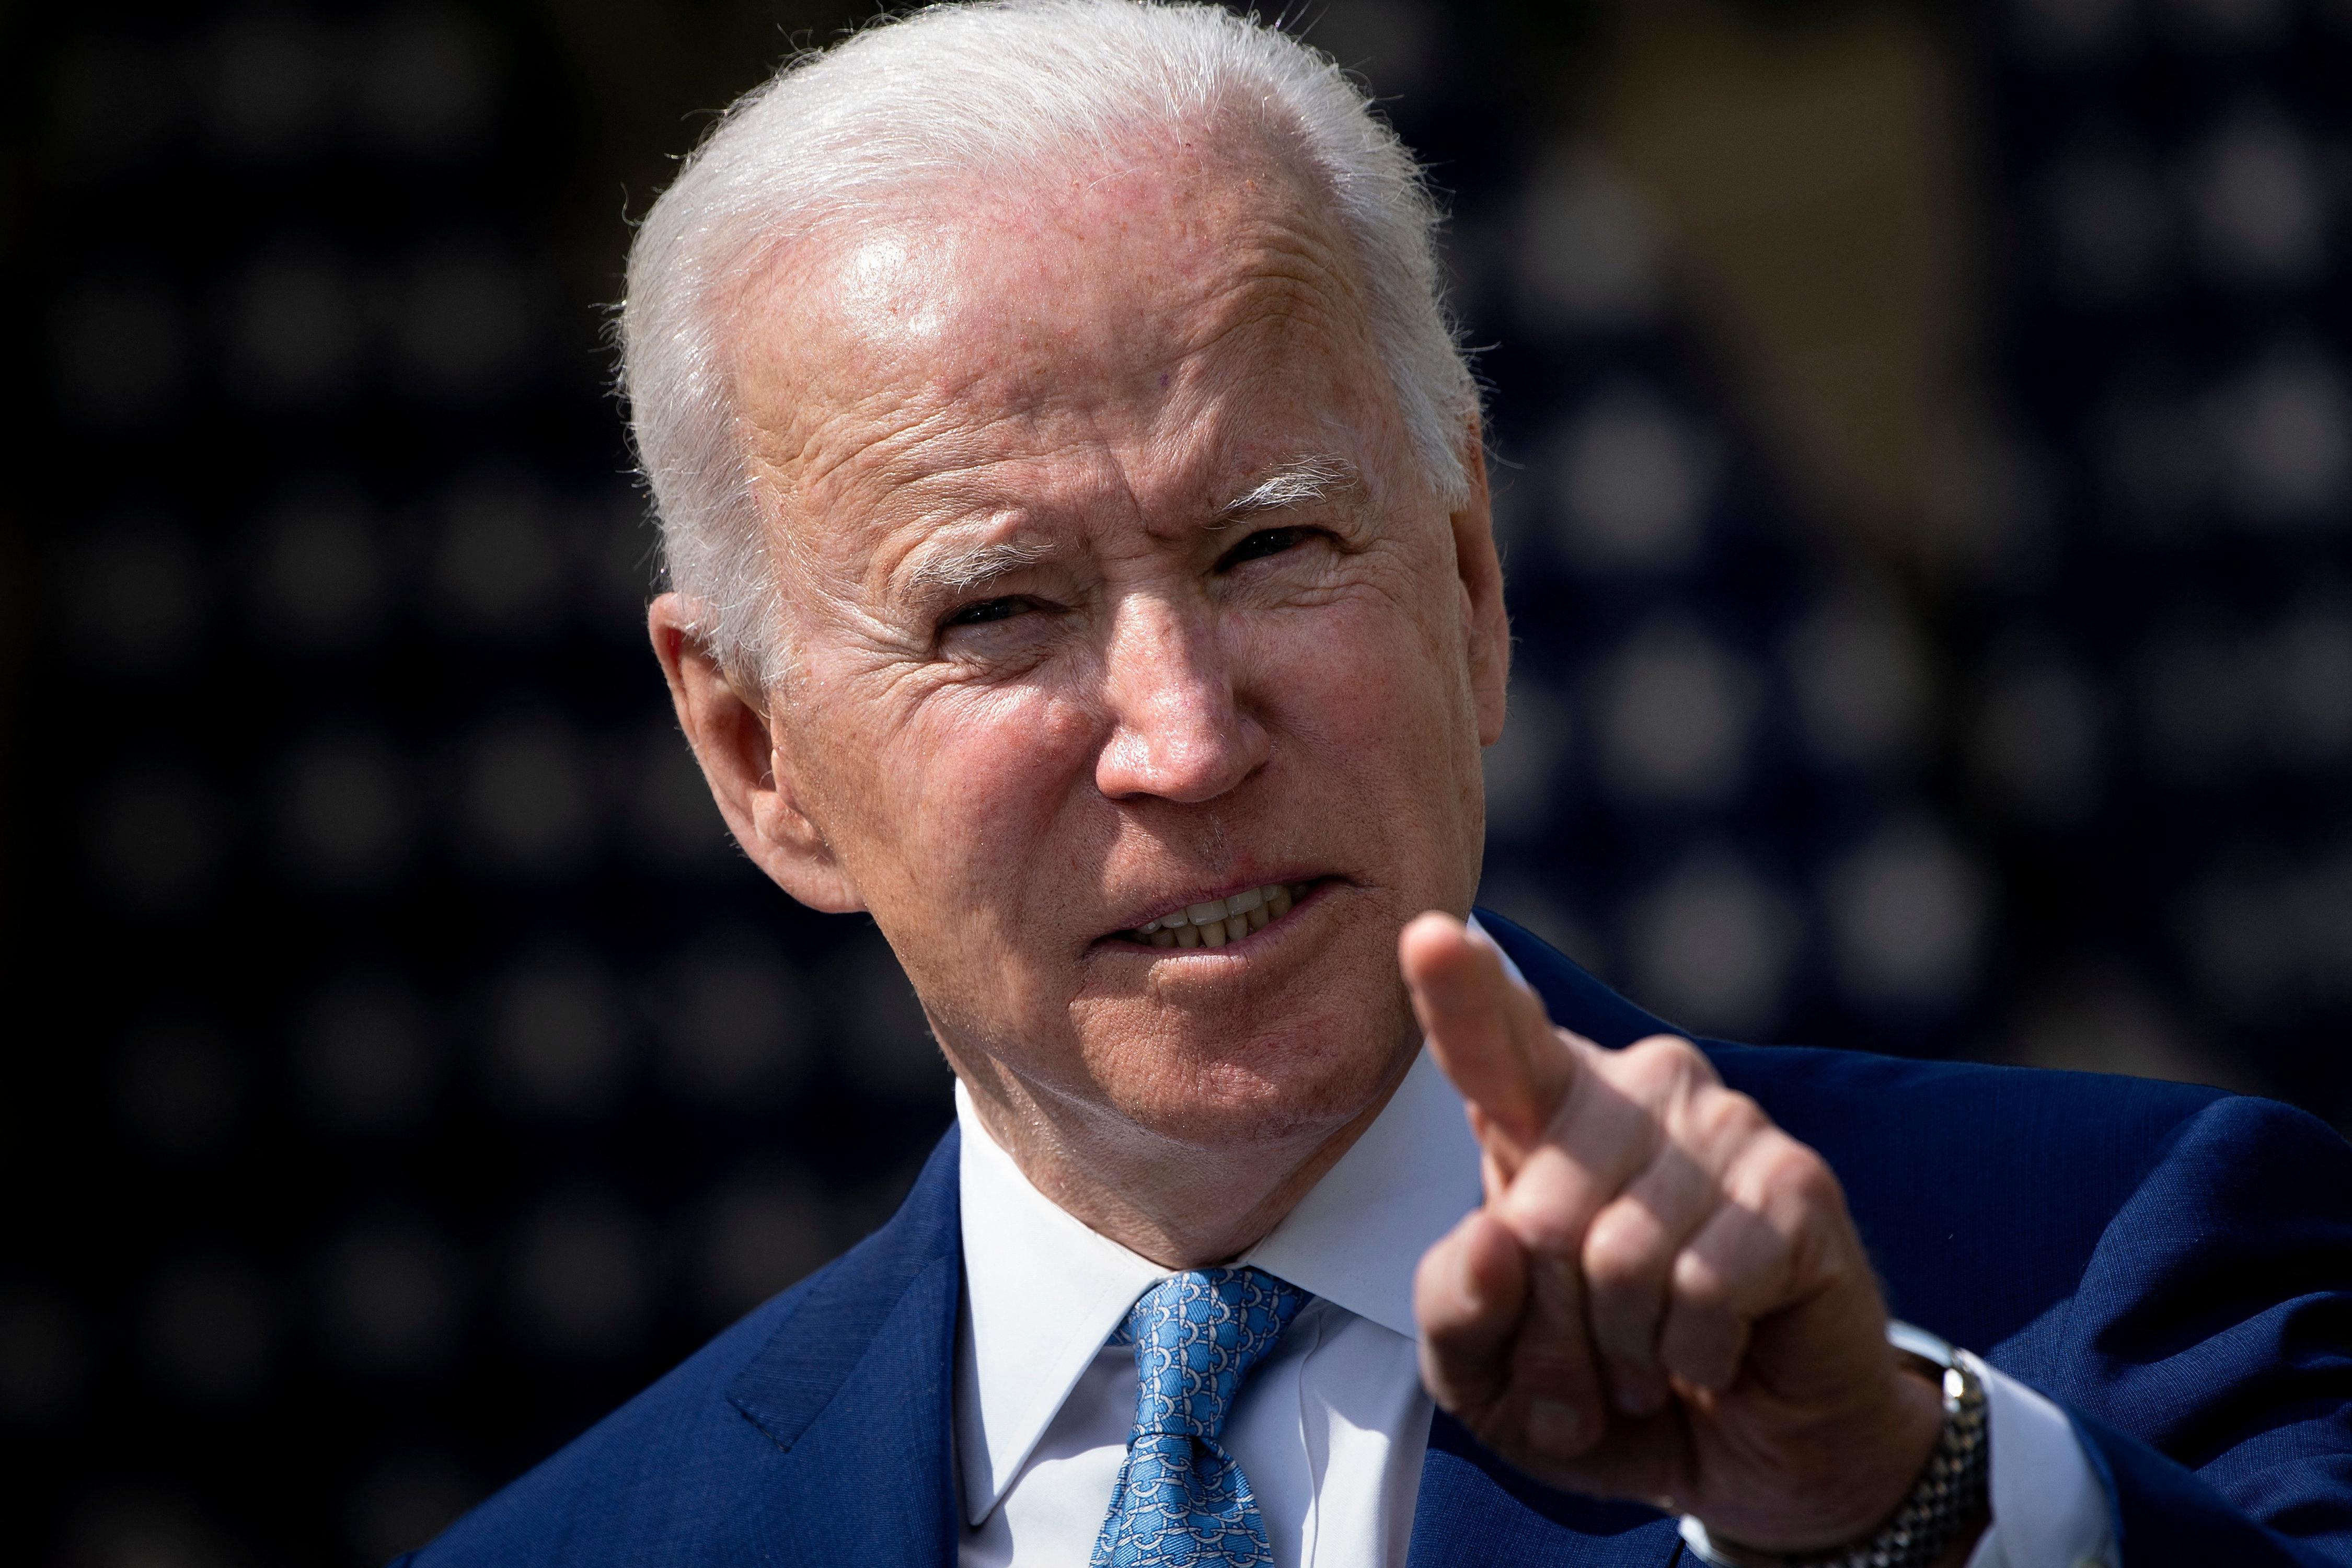 Joe Biden points while speaking from behind a podium in the Rose Garden of the White House.